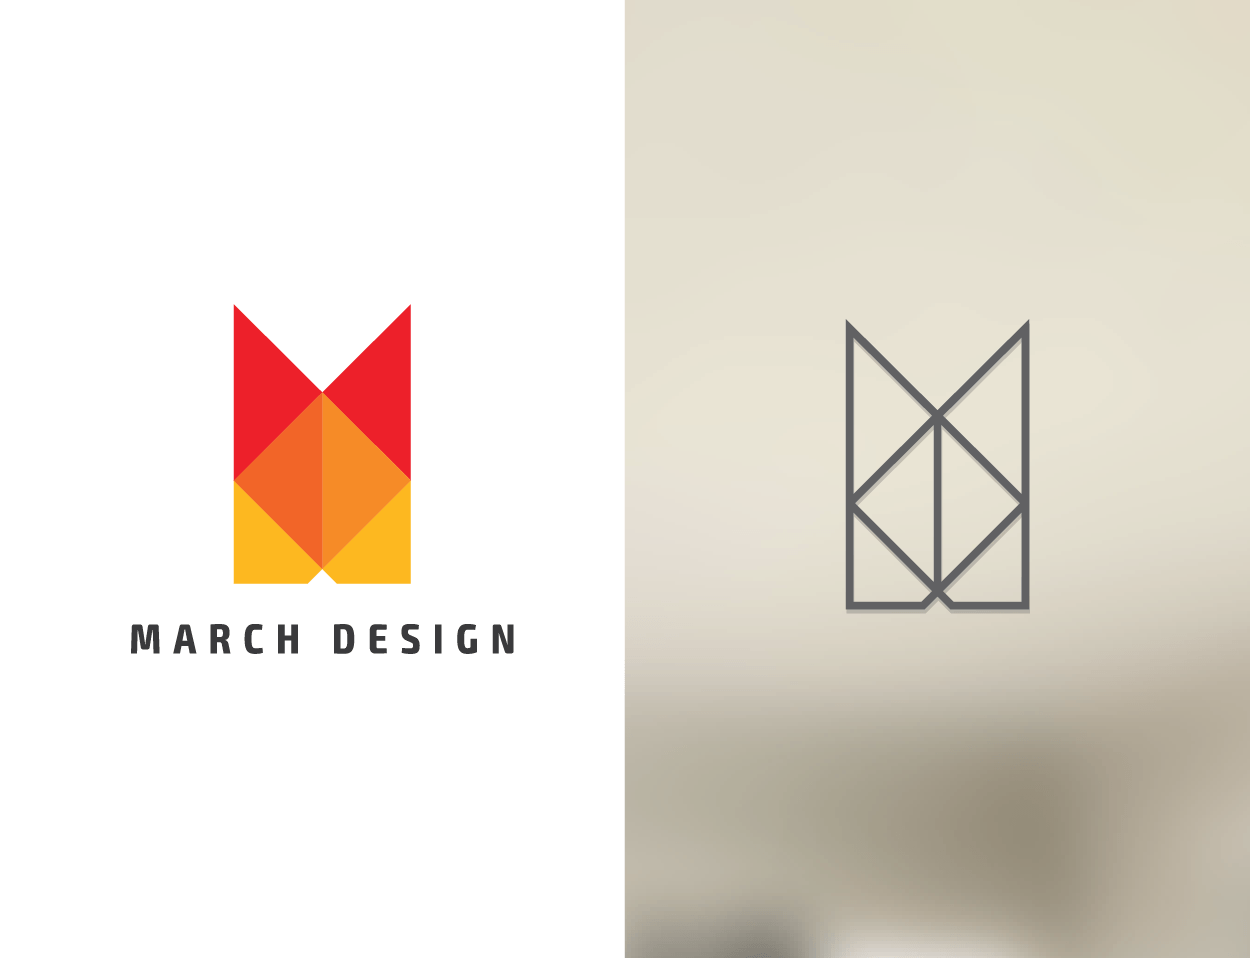 March Logo - Professional, Upmarket, Architecture Logo Design for MD or March ...